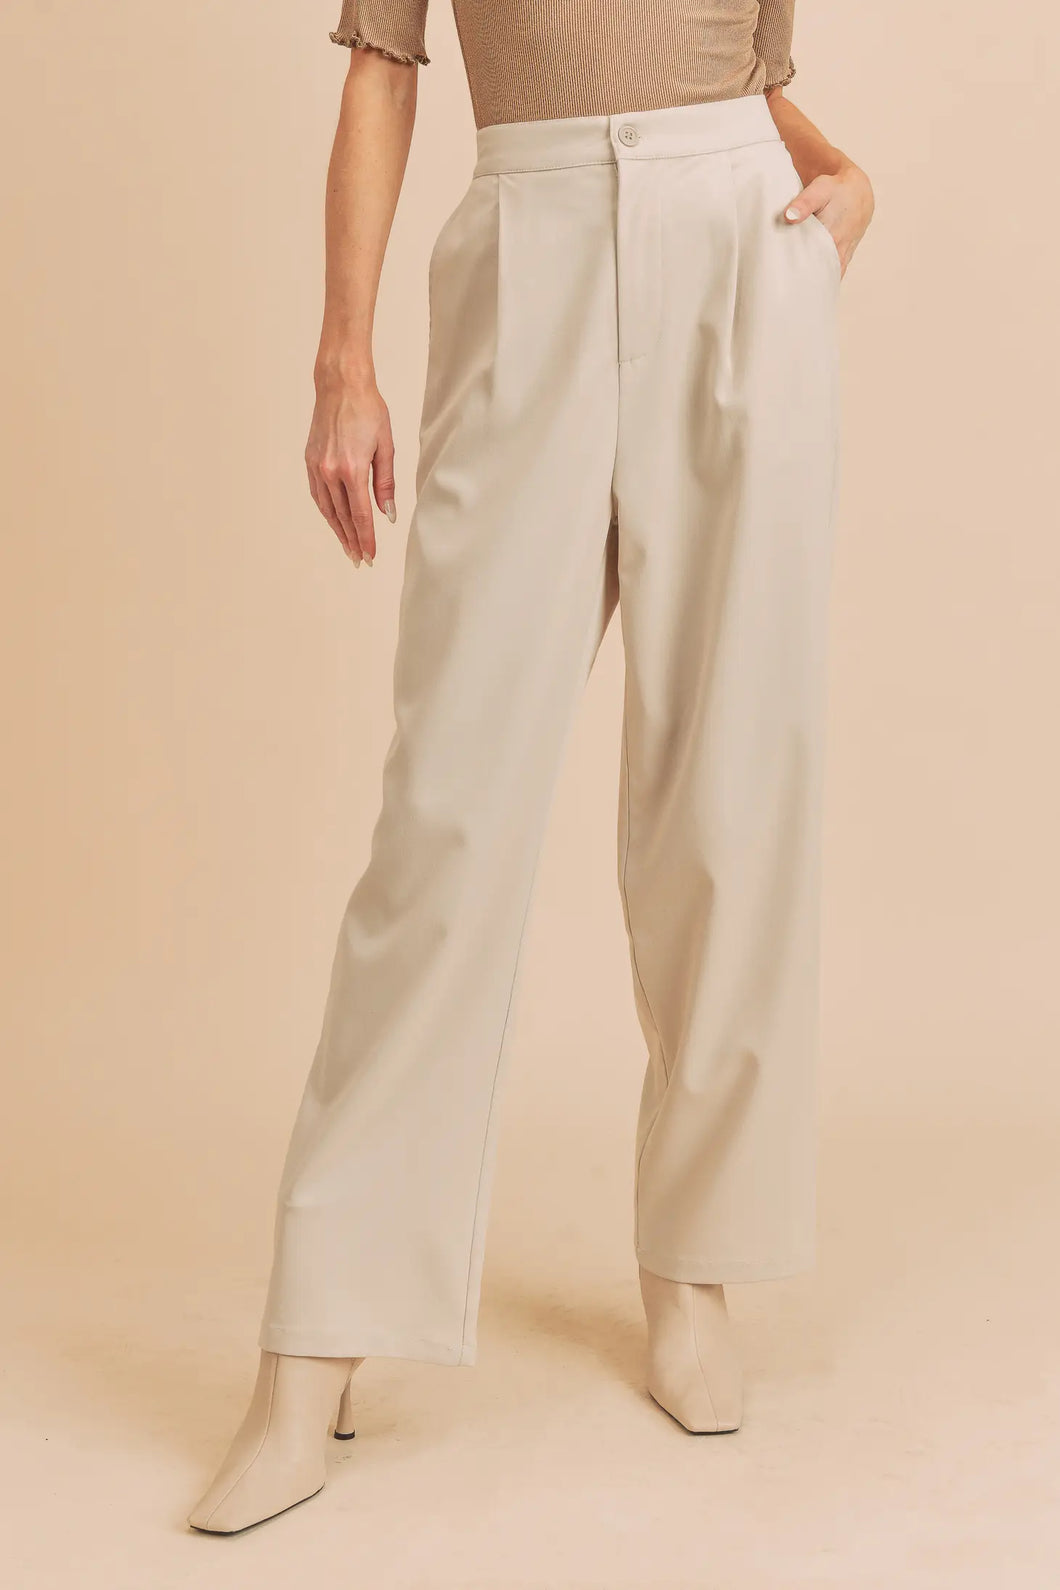 So Chic Trousers